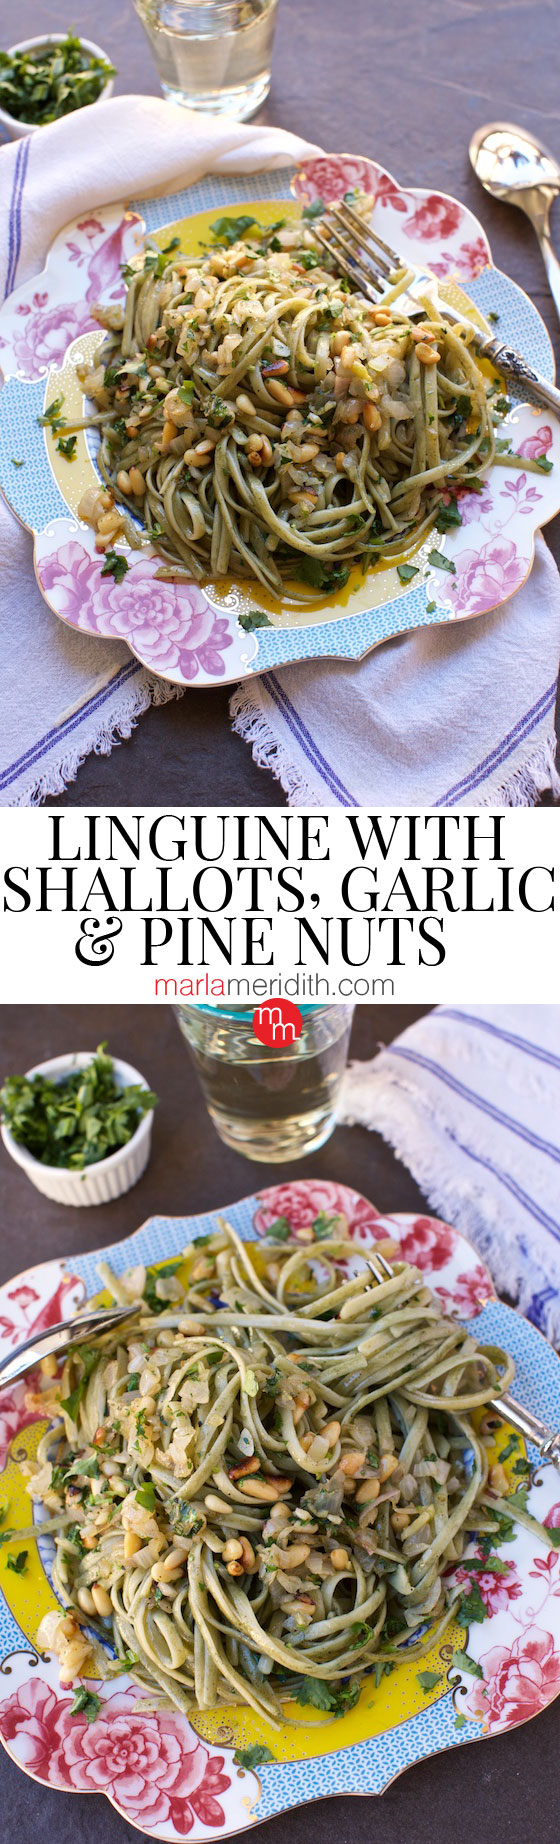 Linguine with Shallots, Garlic and Pine Nuts recipe. This vegan dish can be on the table in less than 20 minutes! marlameridith.com ( @marlameridith )